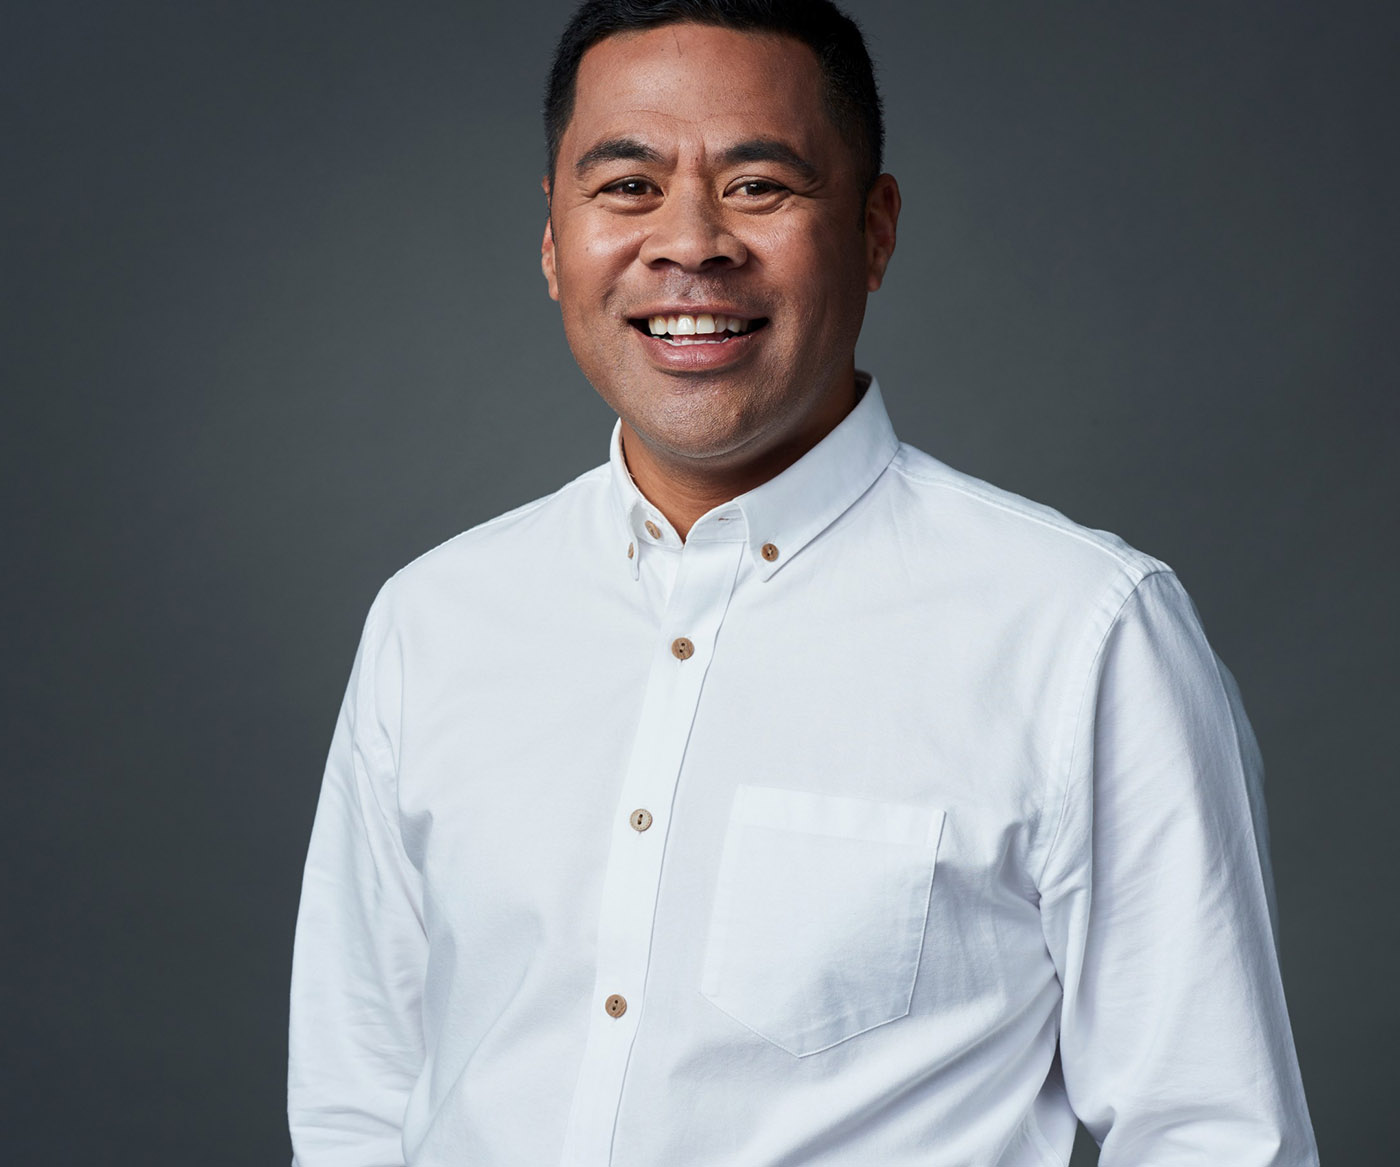 The Breakfast ‘family’ loses another member as Daniel Faitaua gets set to become TVNZ’s new Europe correspondent